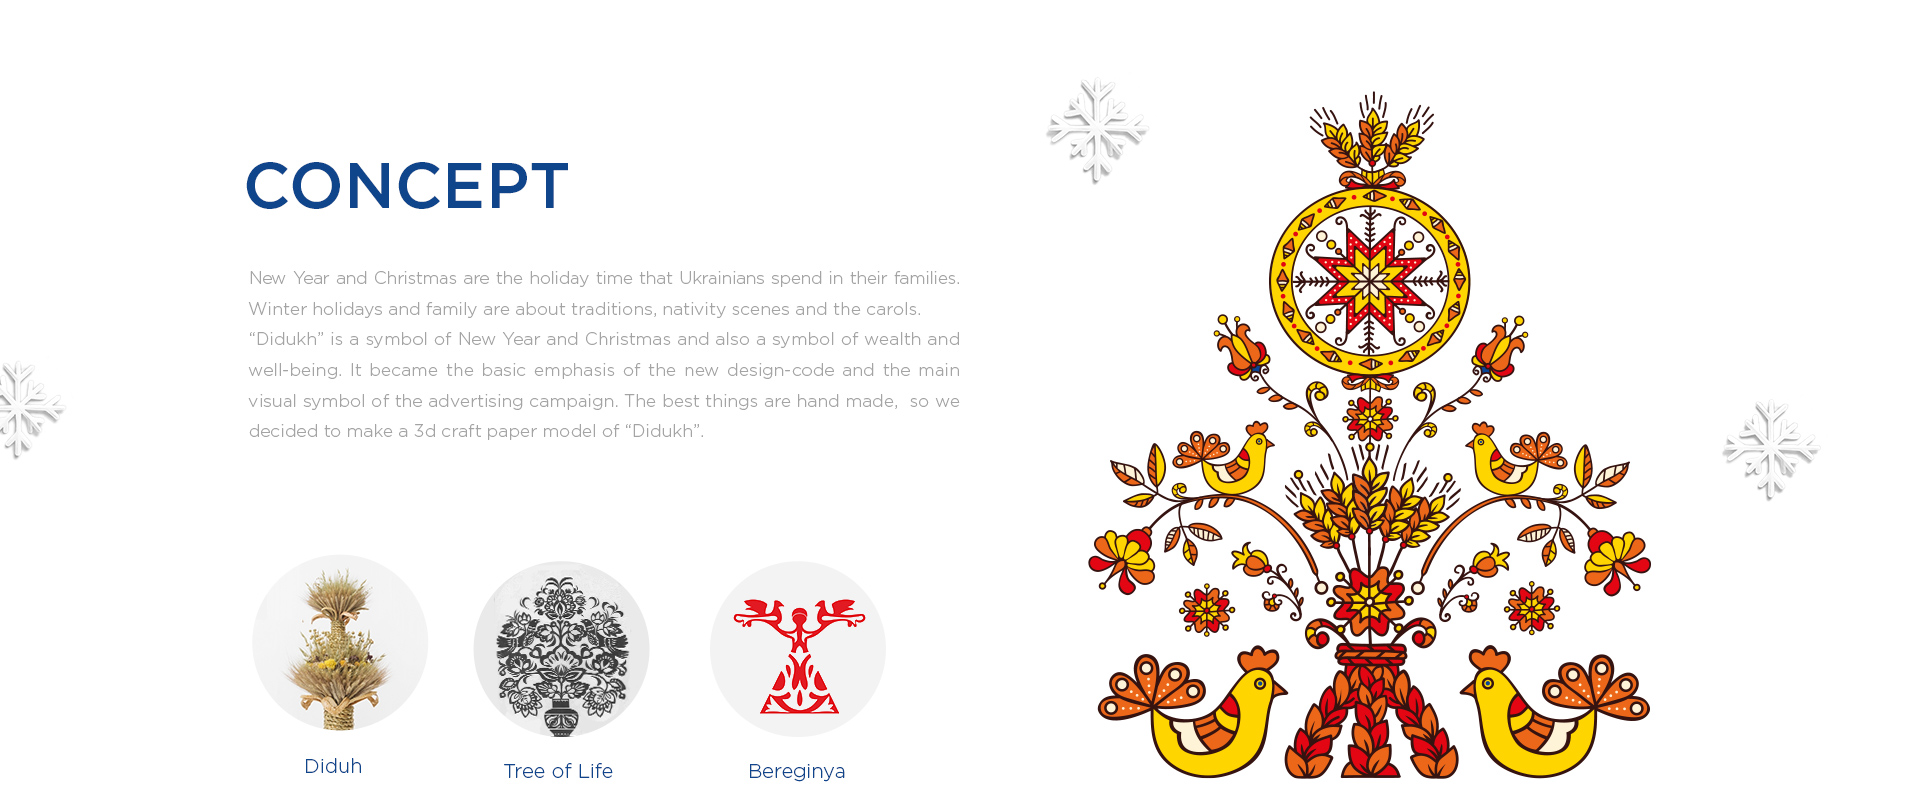 Didukh is a symbol of New Year and Christmas in Ukraine and also a symbol of wealth and well-being